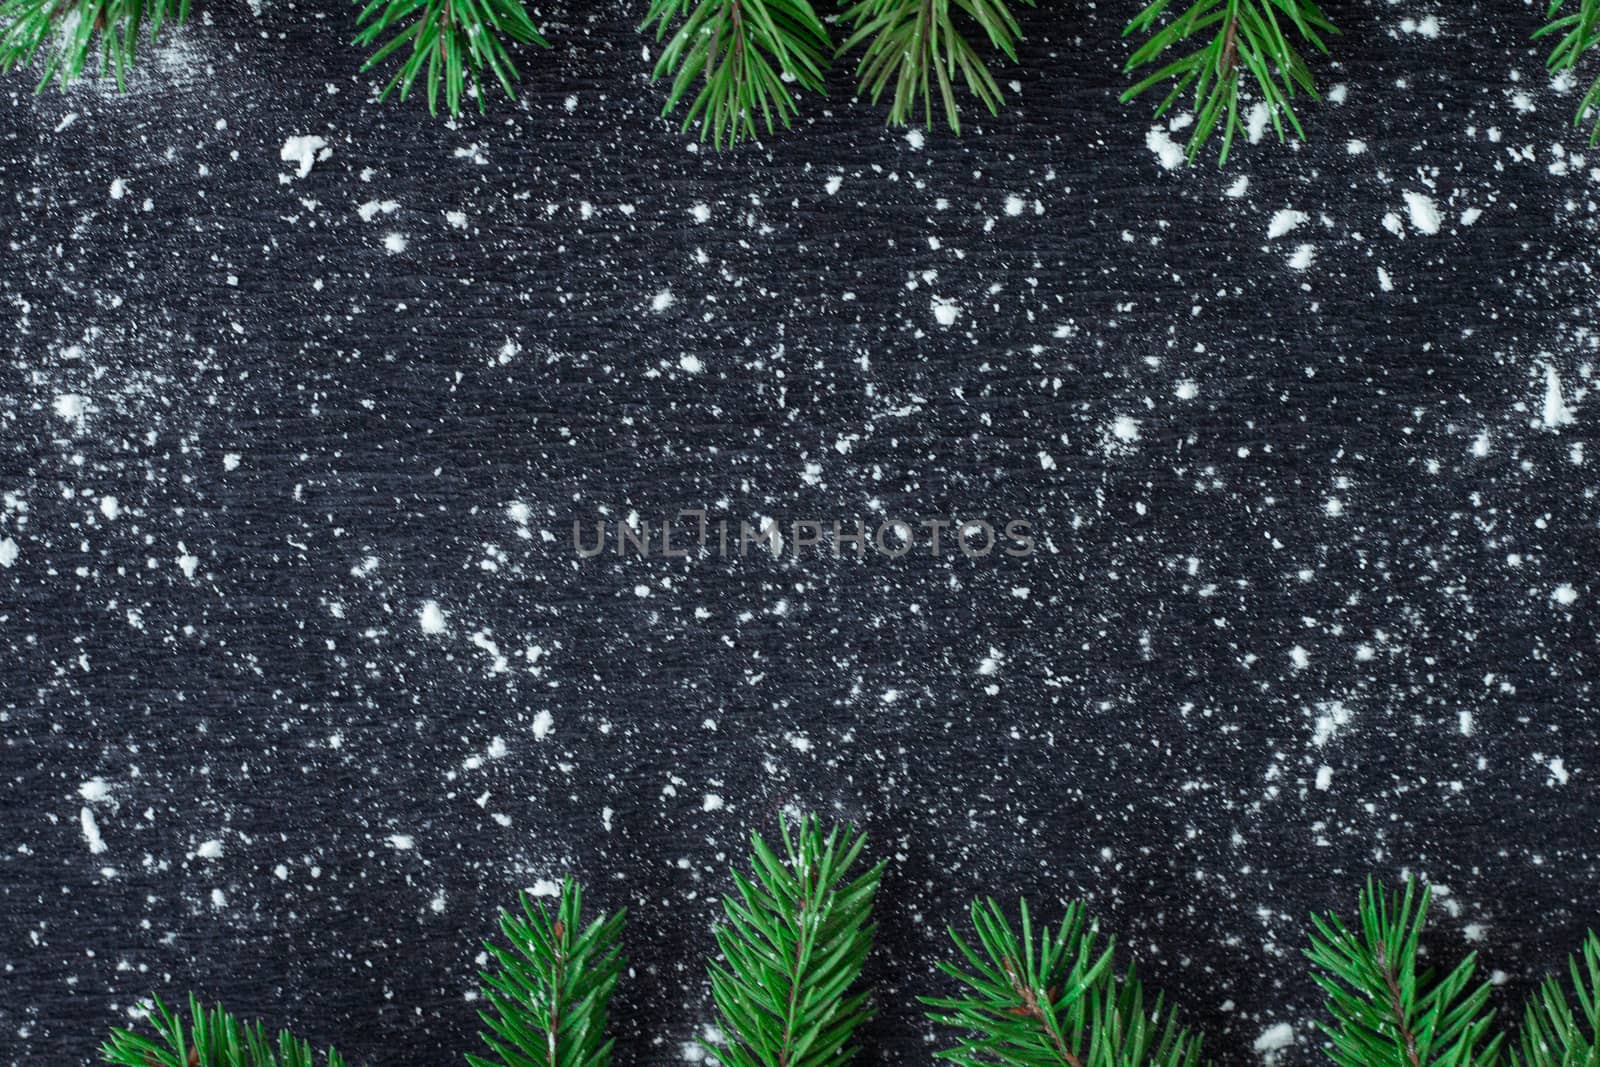 Christmas and New Year winter holiday snowbound black space background with green fir tree branches